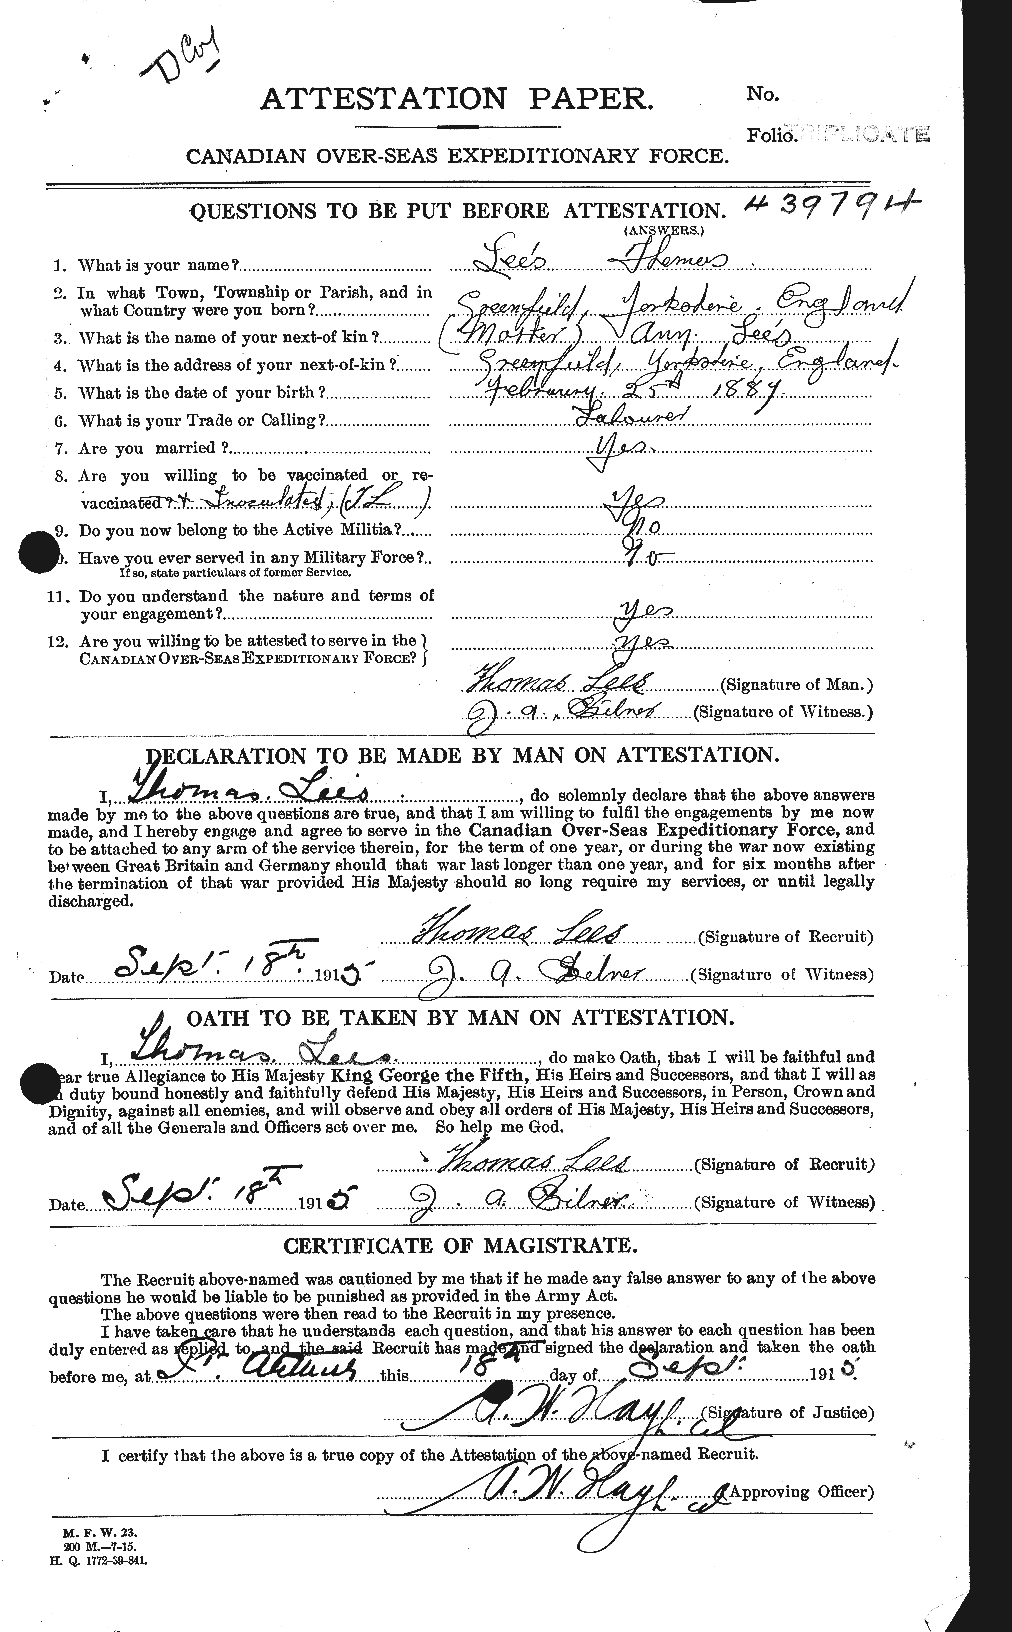 Personnel Records of the First World War - CEF 461110a